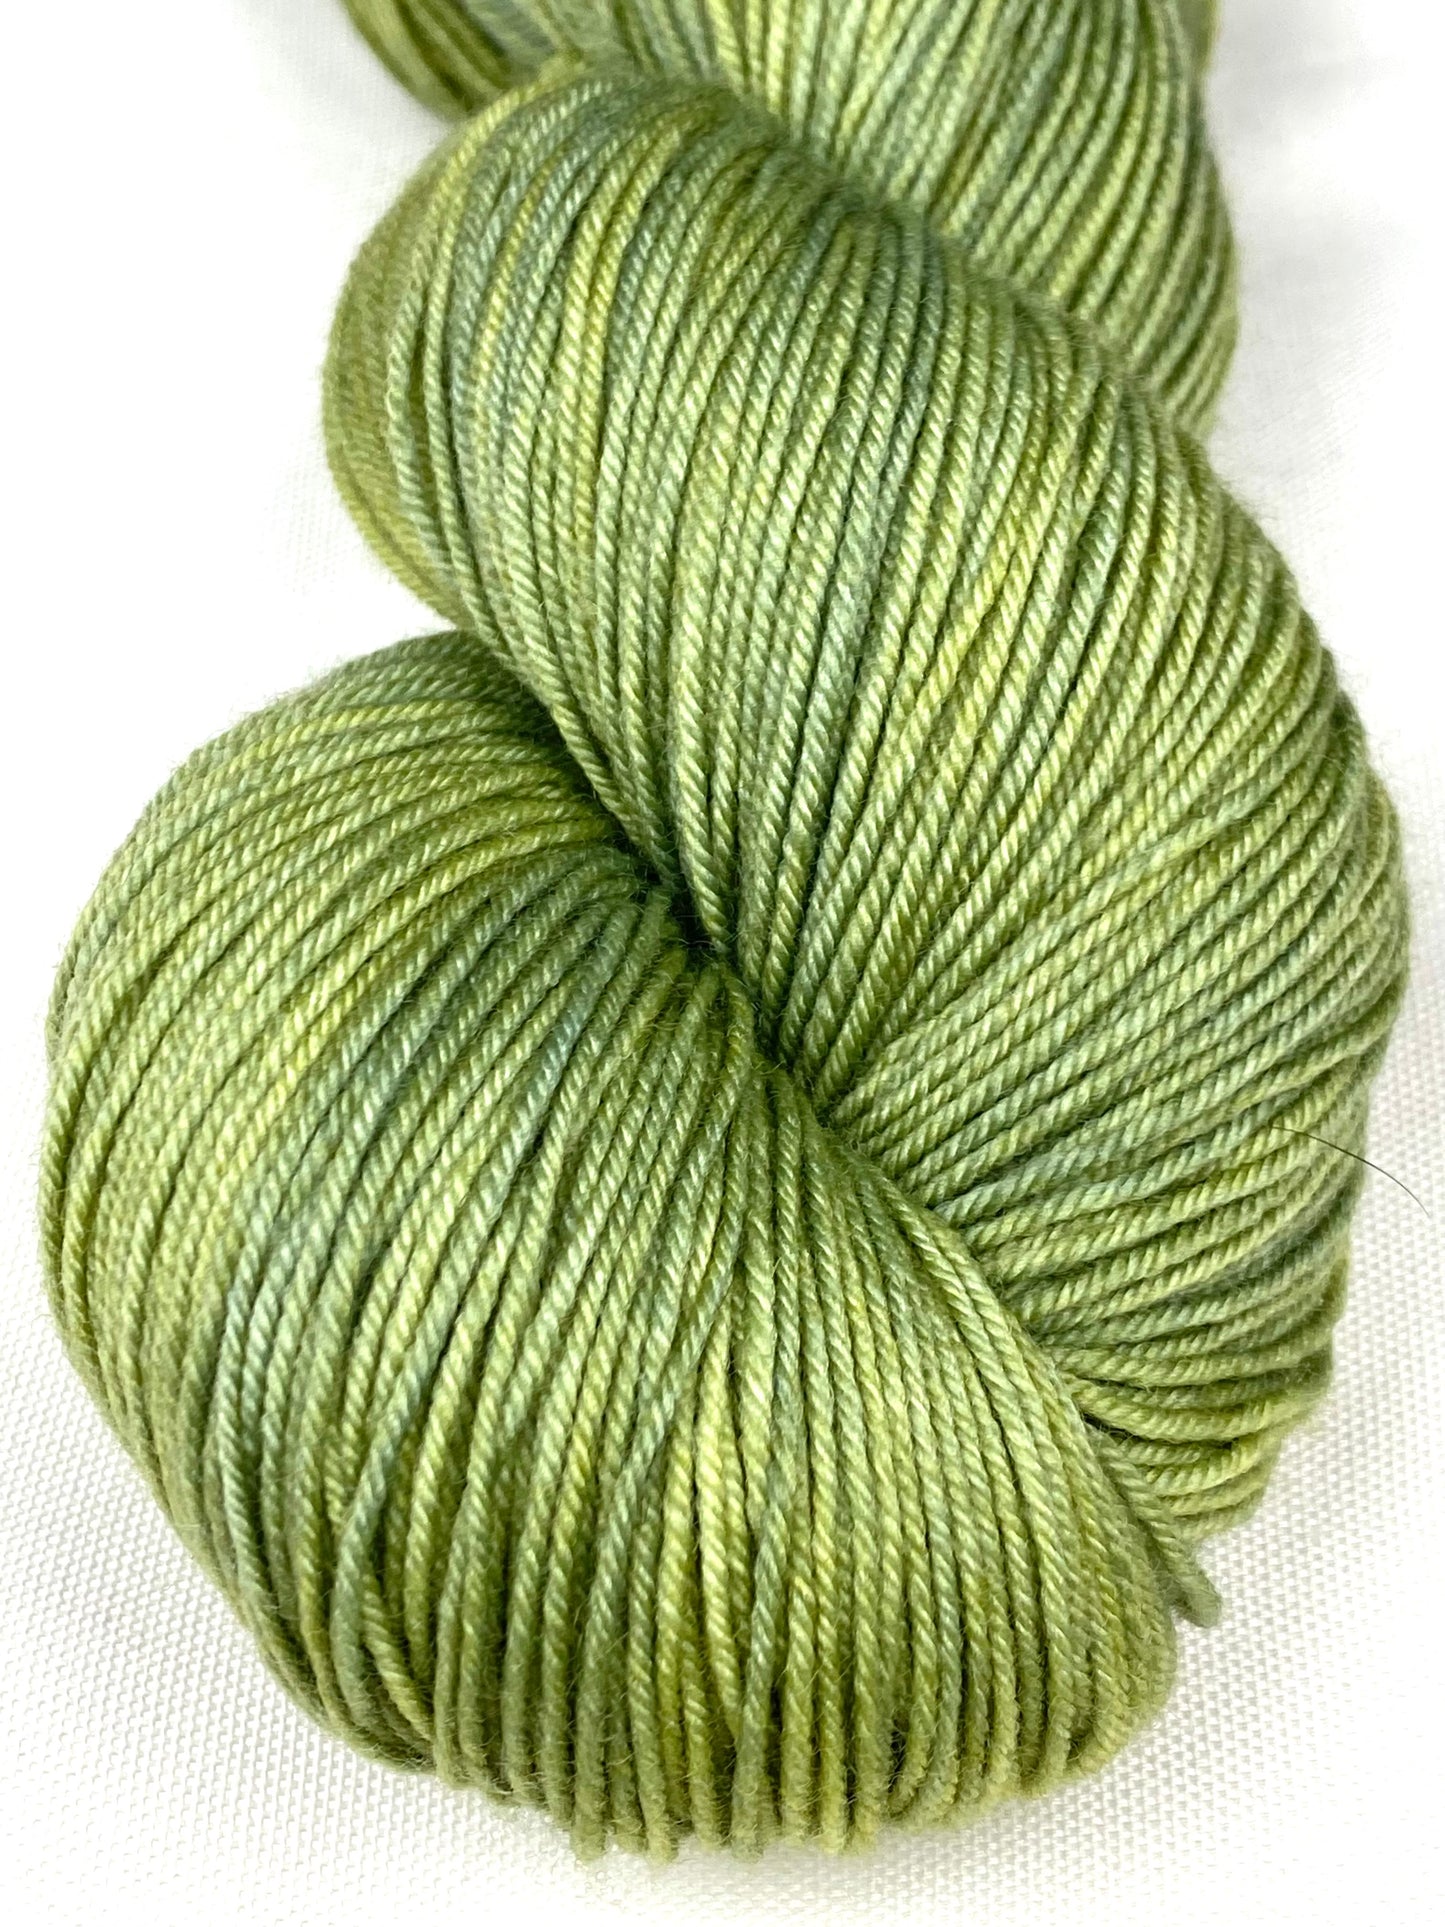 Royal Select Fingering Weight
/ Sea Turtle Green